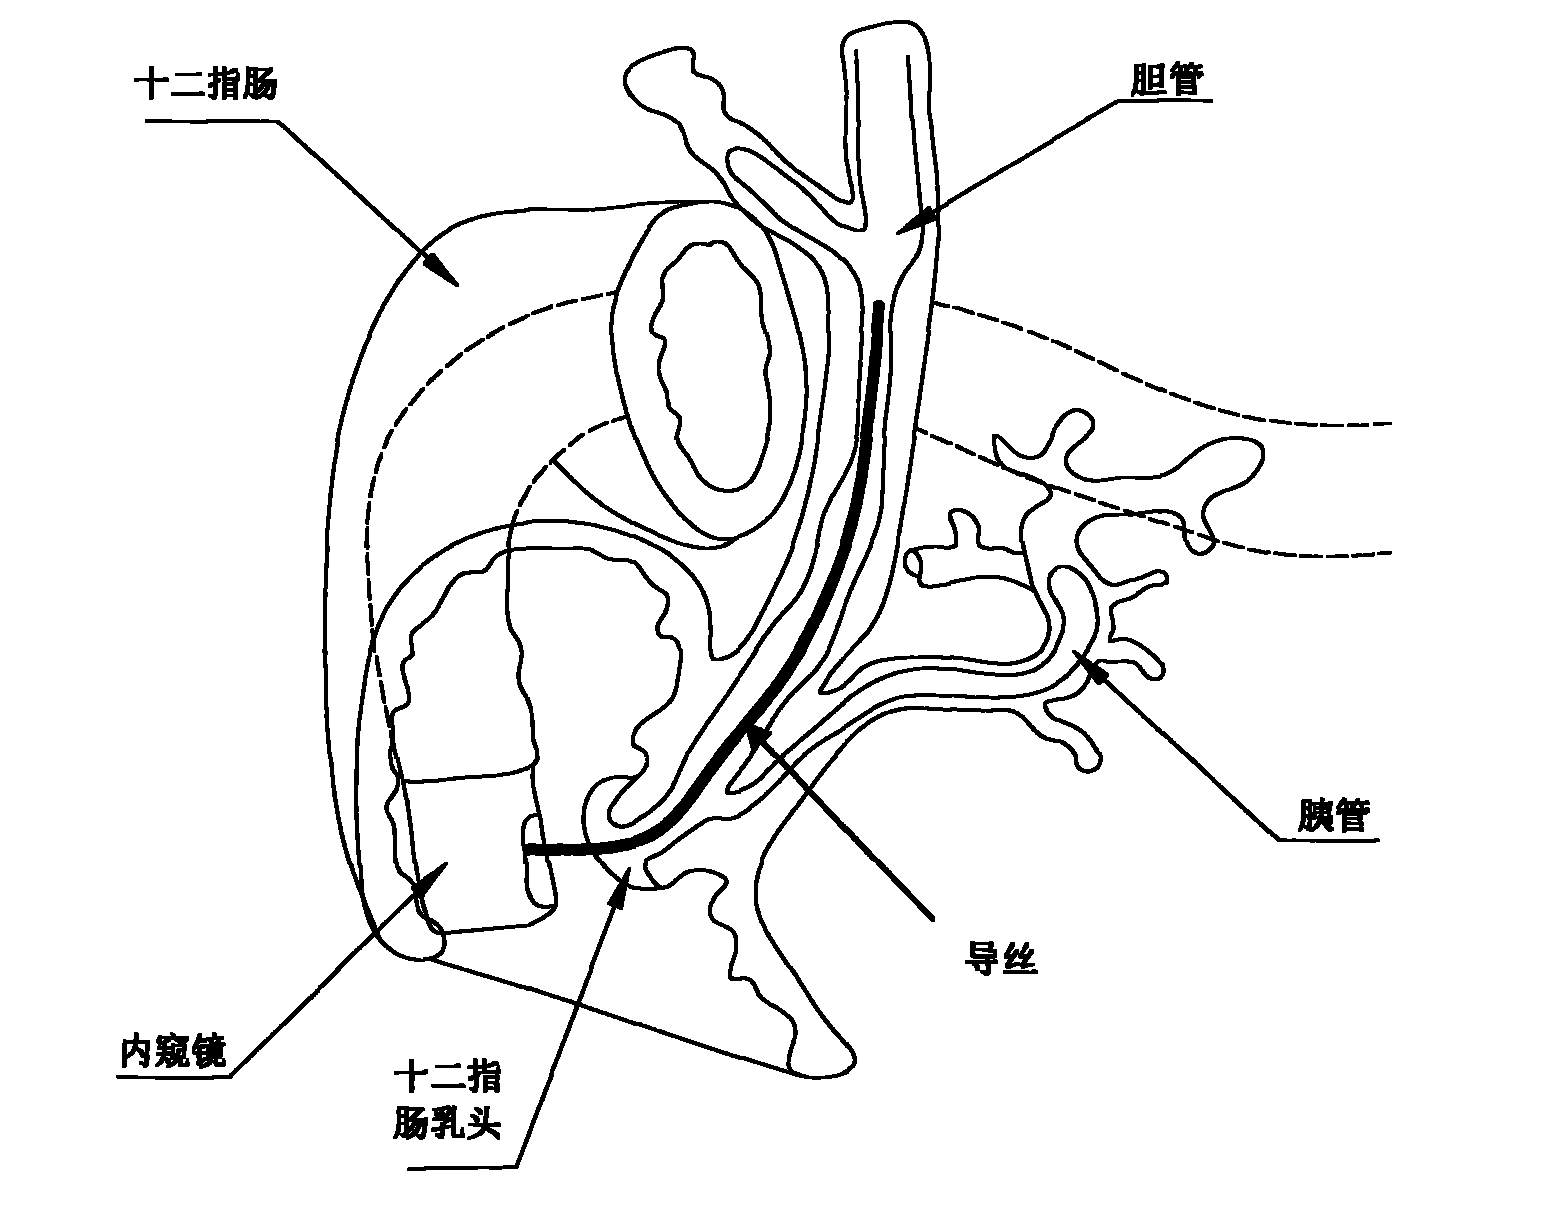 Bile duct puncturing needle